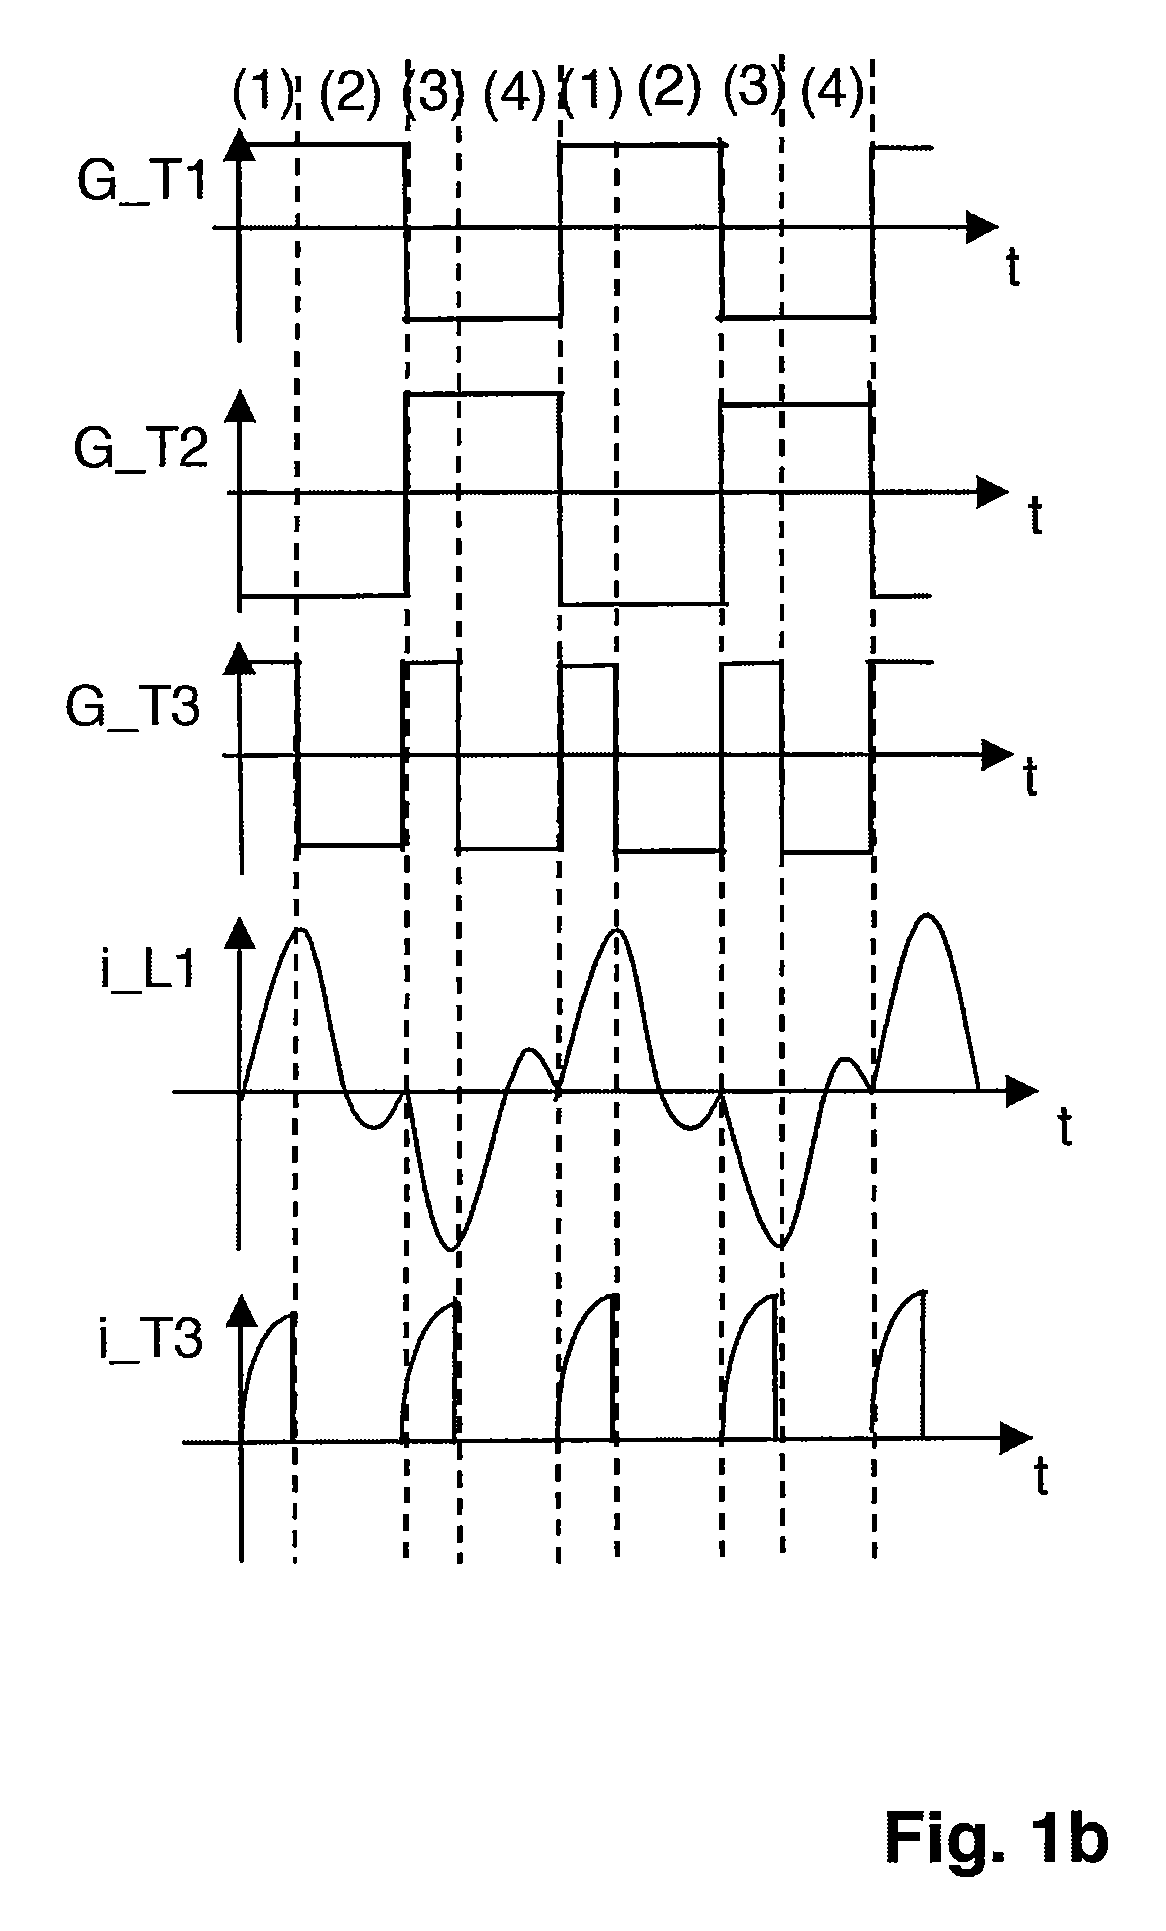 System and method for a power converter having a resonant circuit